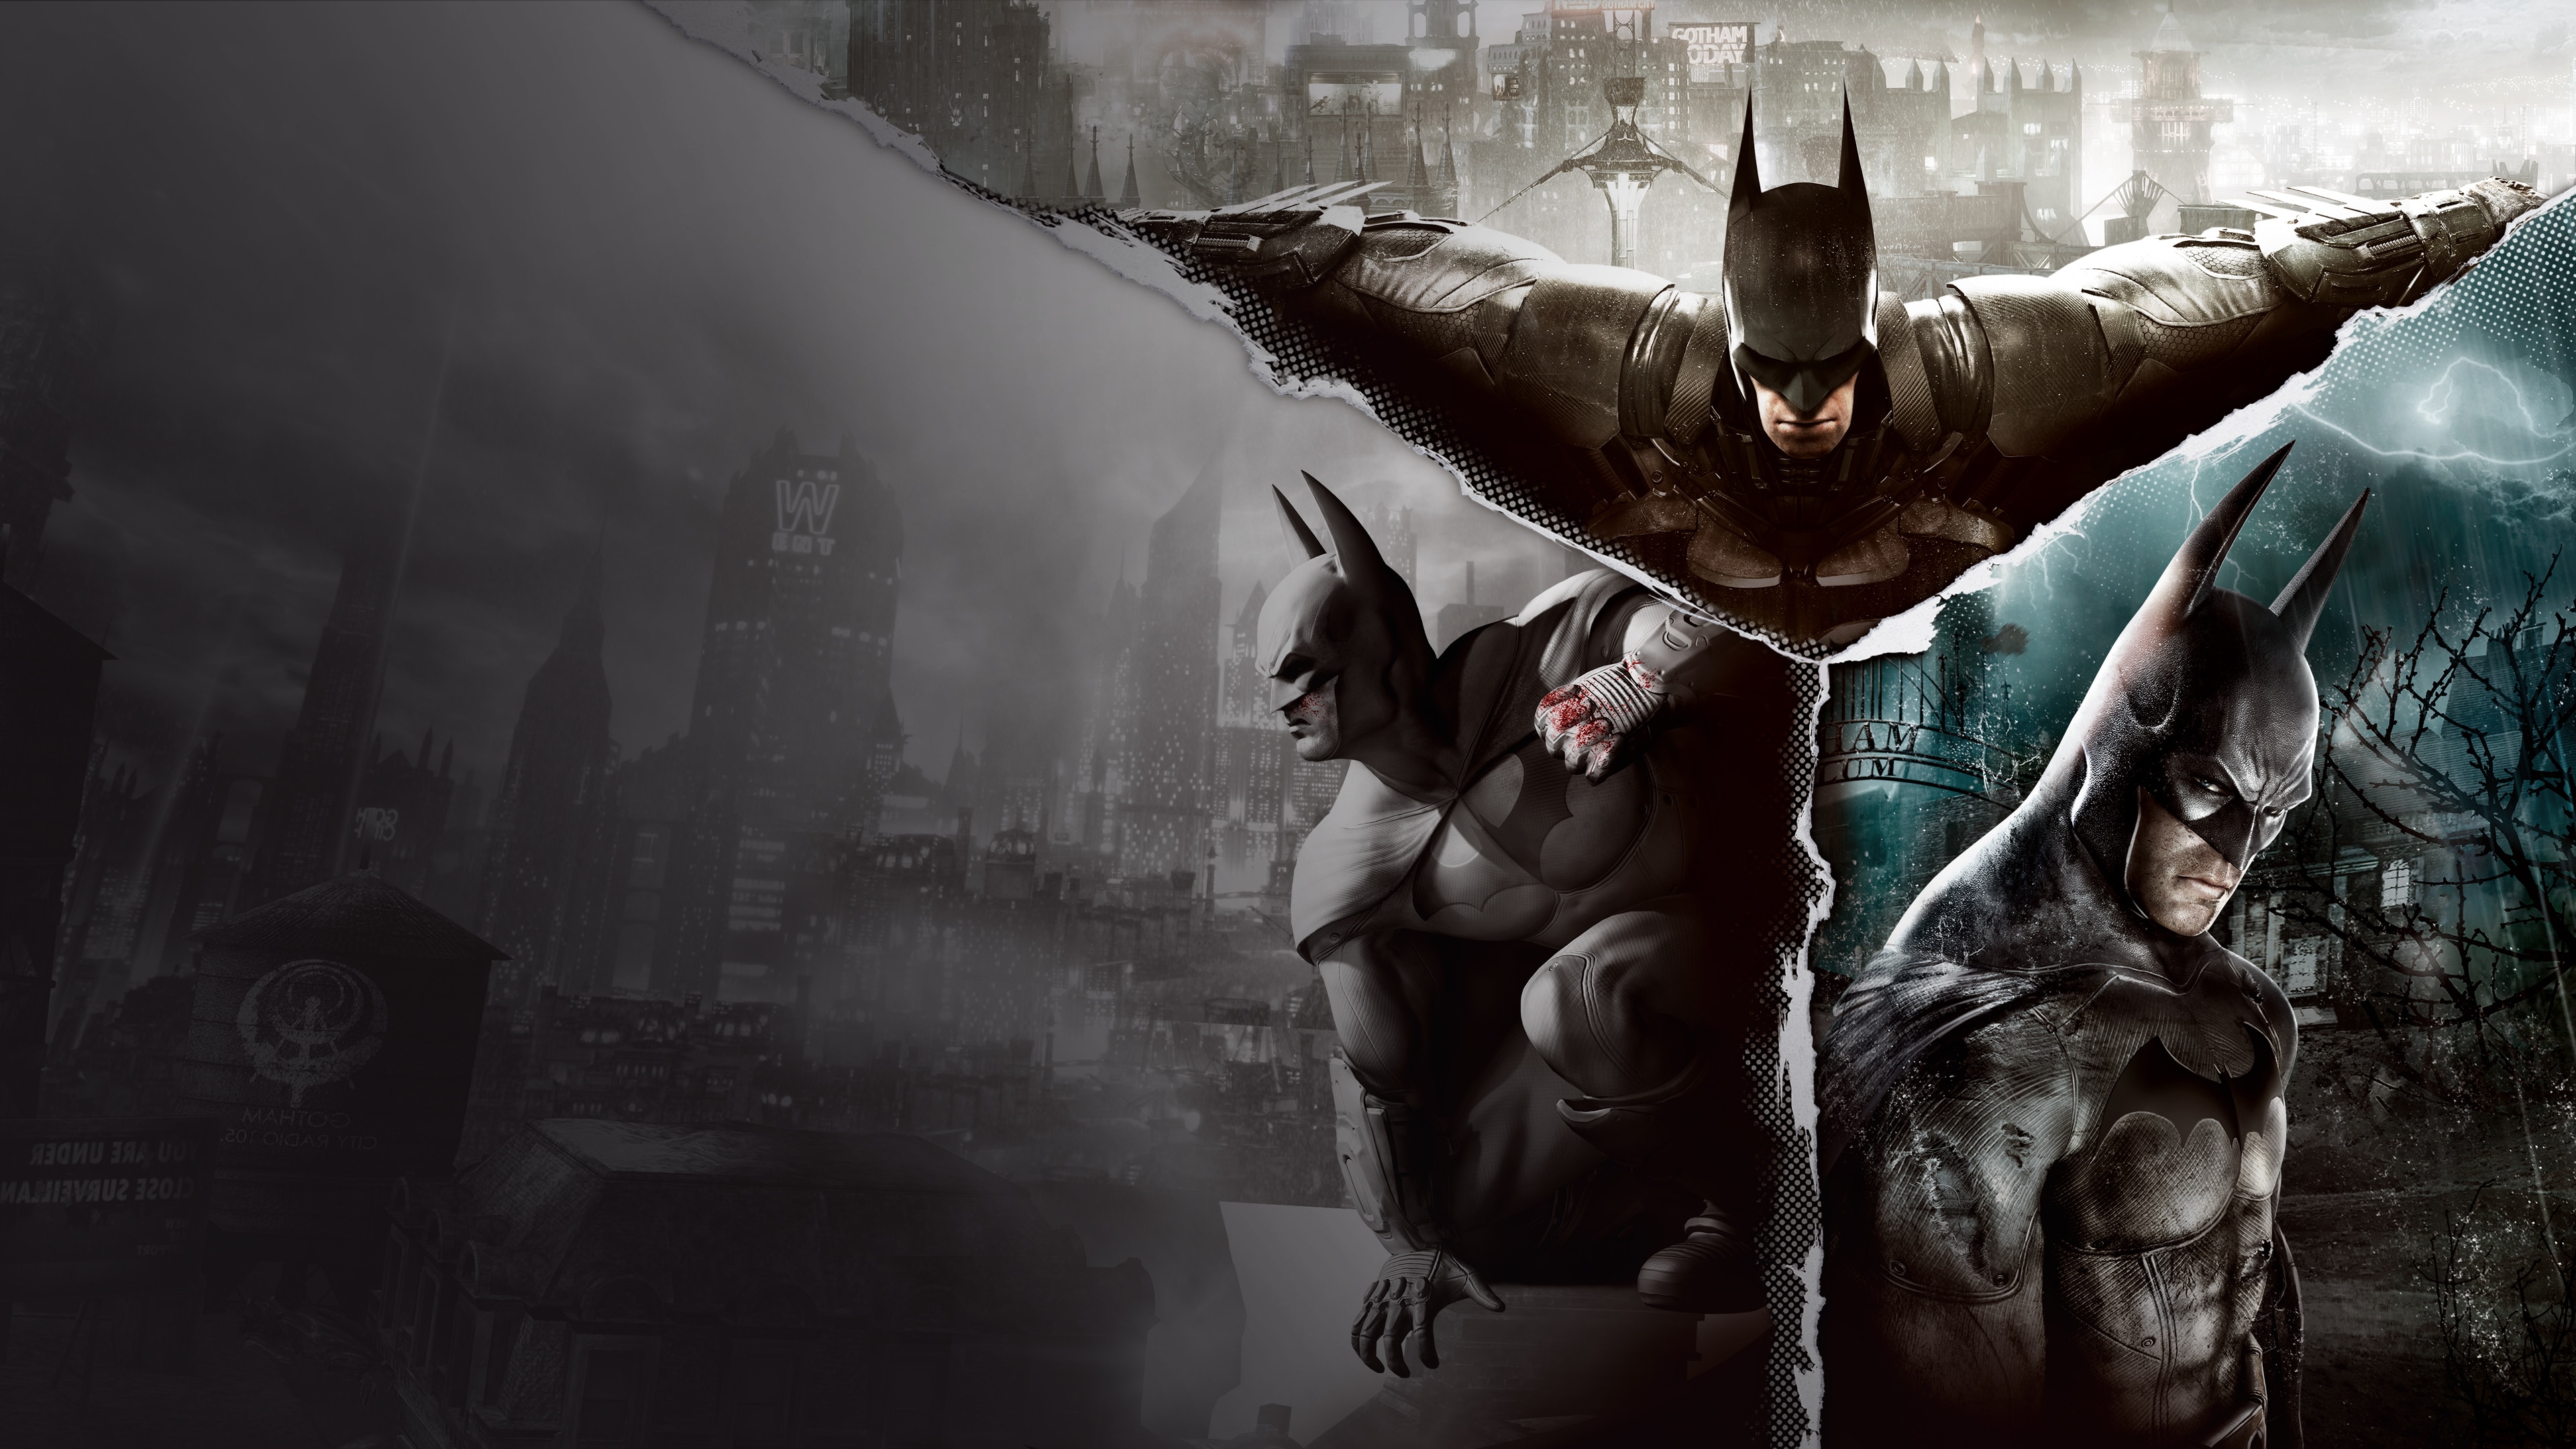 Batman: Arkham Knight wallpapers for desktop, download free Batman: Arkham  Knight pictures and backgrounds for PC | mob.org